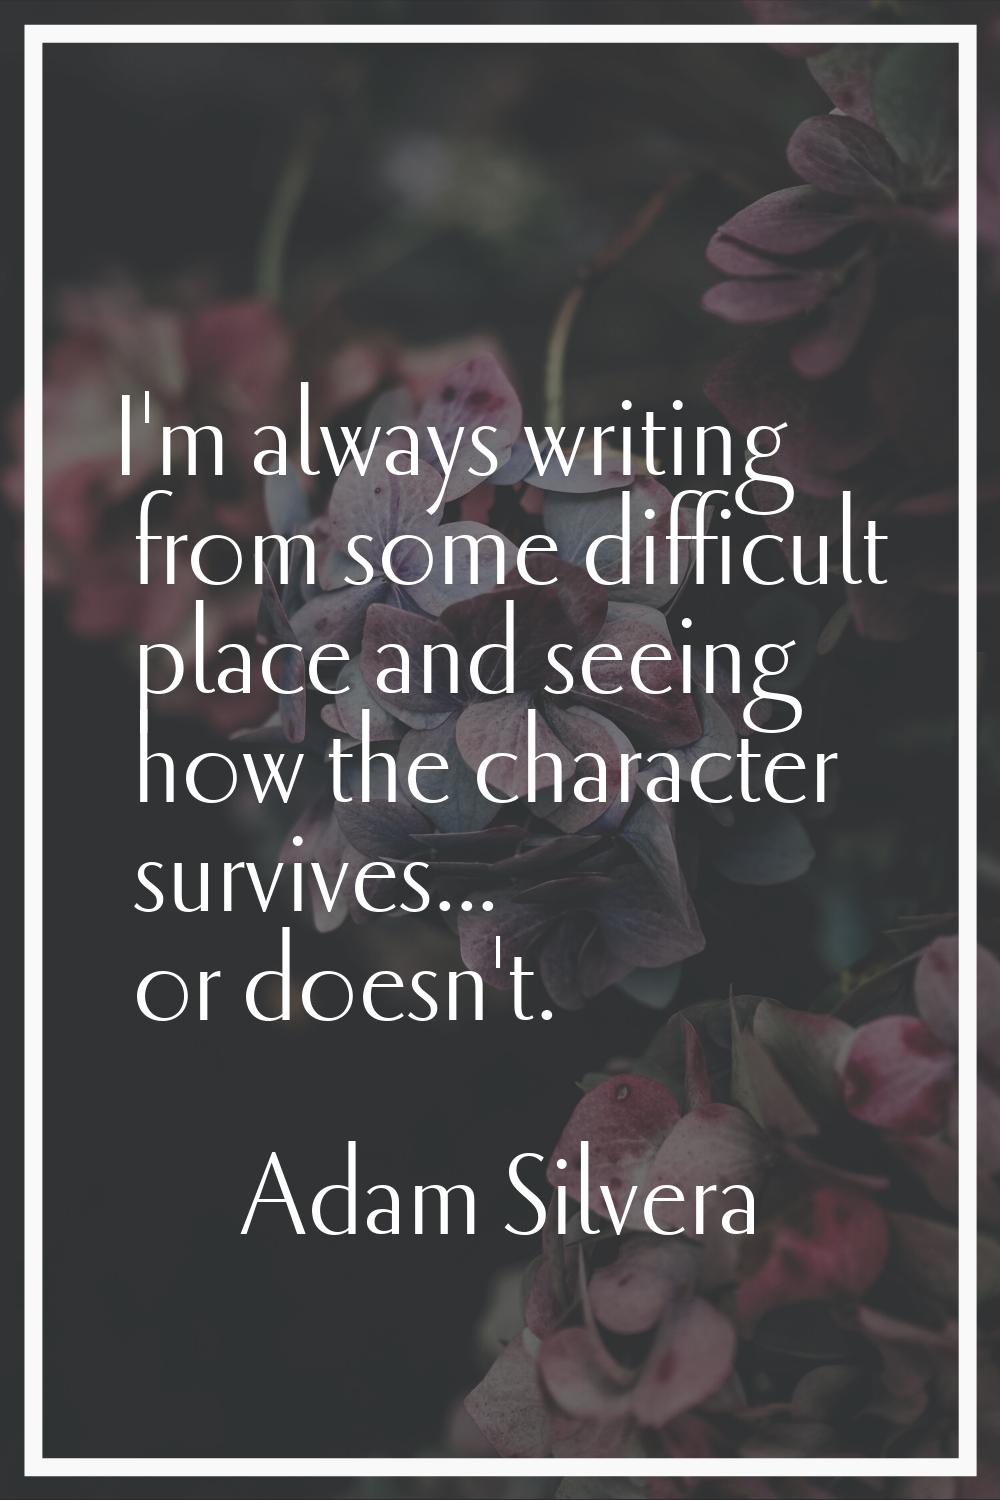 I'm always writing from some difficult place and seeing how the character survives... or doesn't.